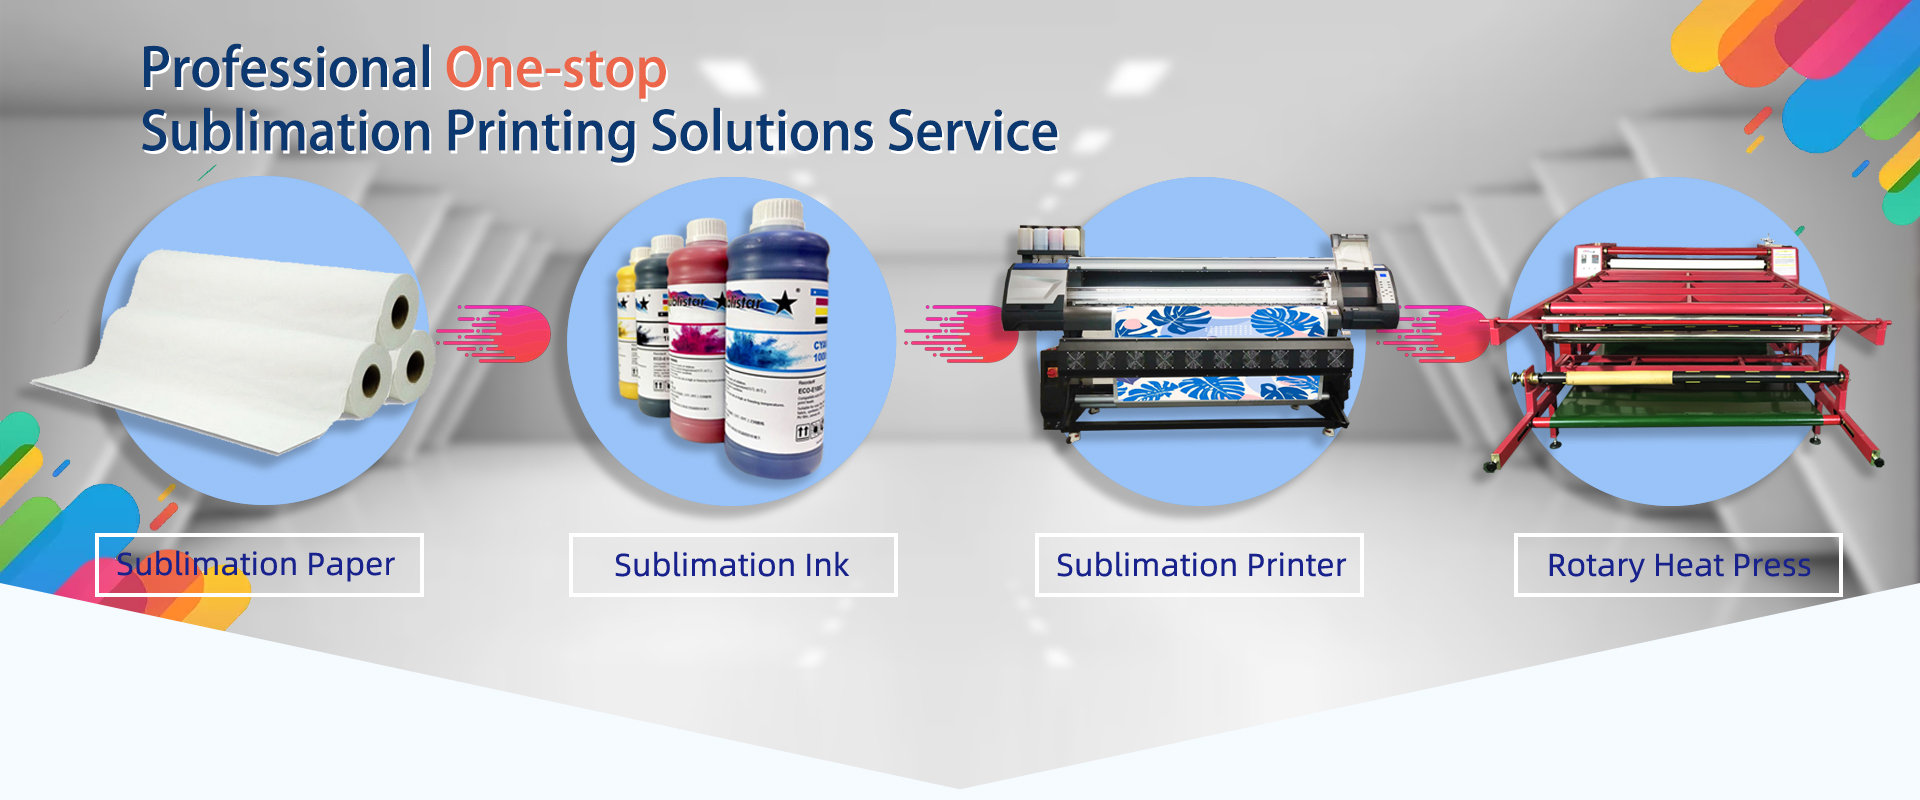 S2508 PRO Industrial Sublimation Printer with S3200 Print heads